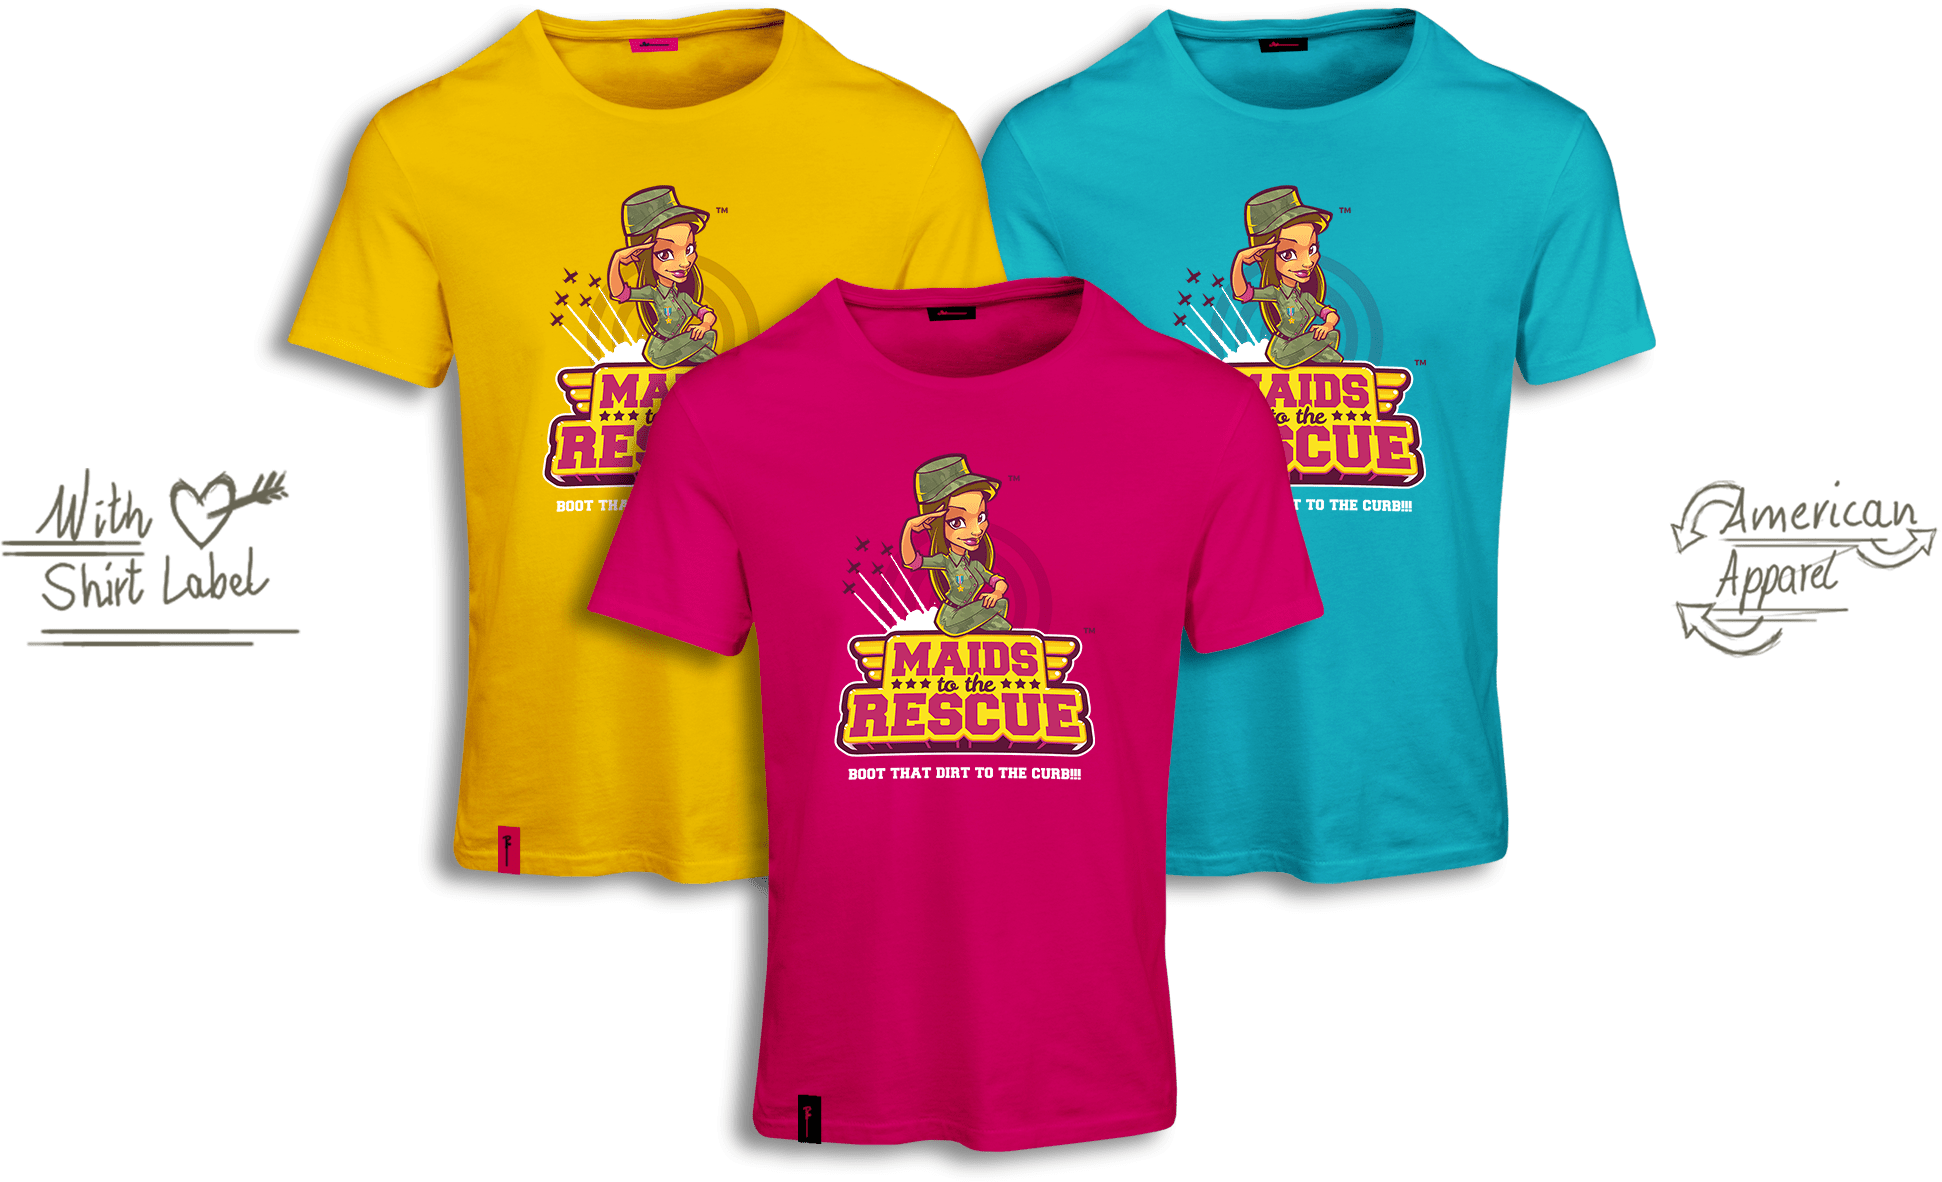 Maids to the Rescue t-shirts